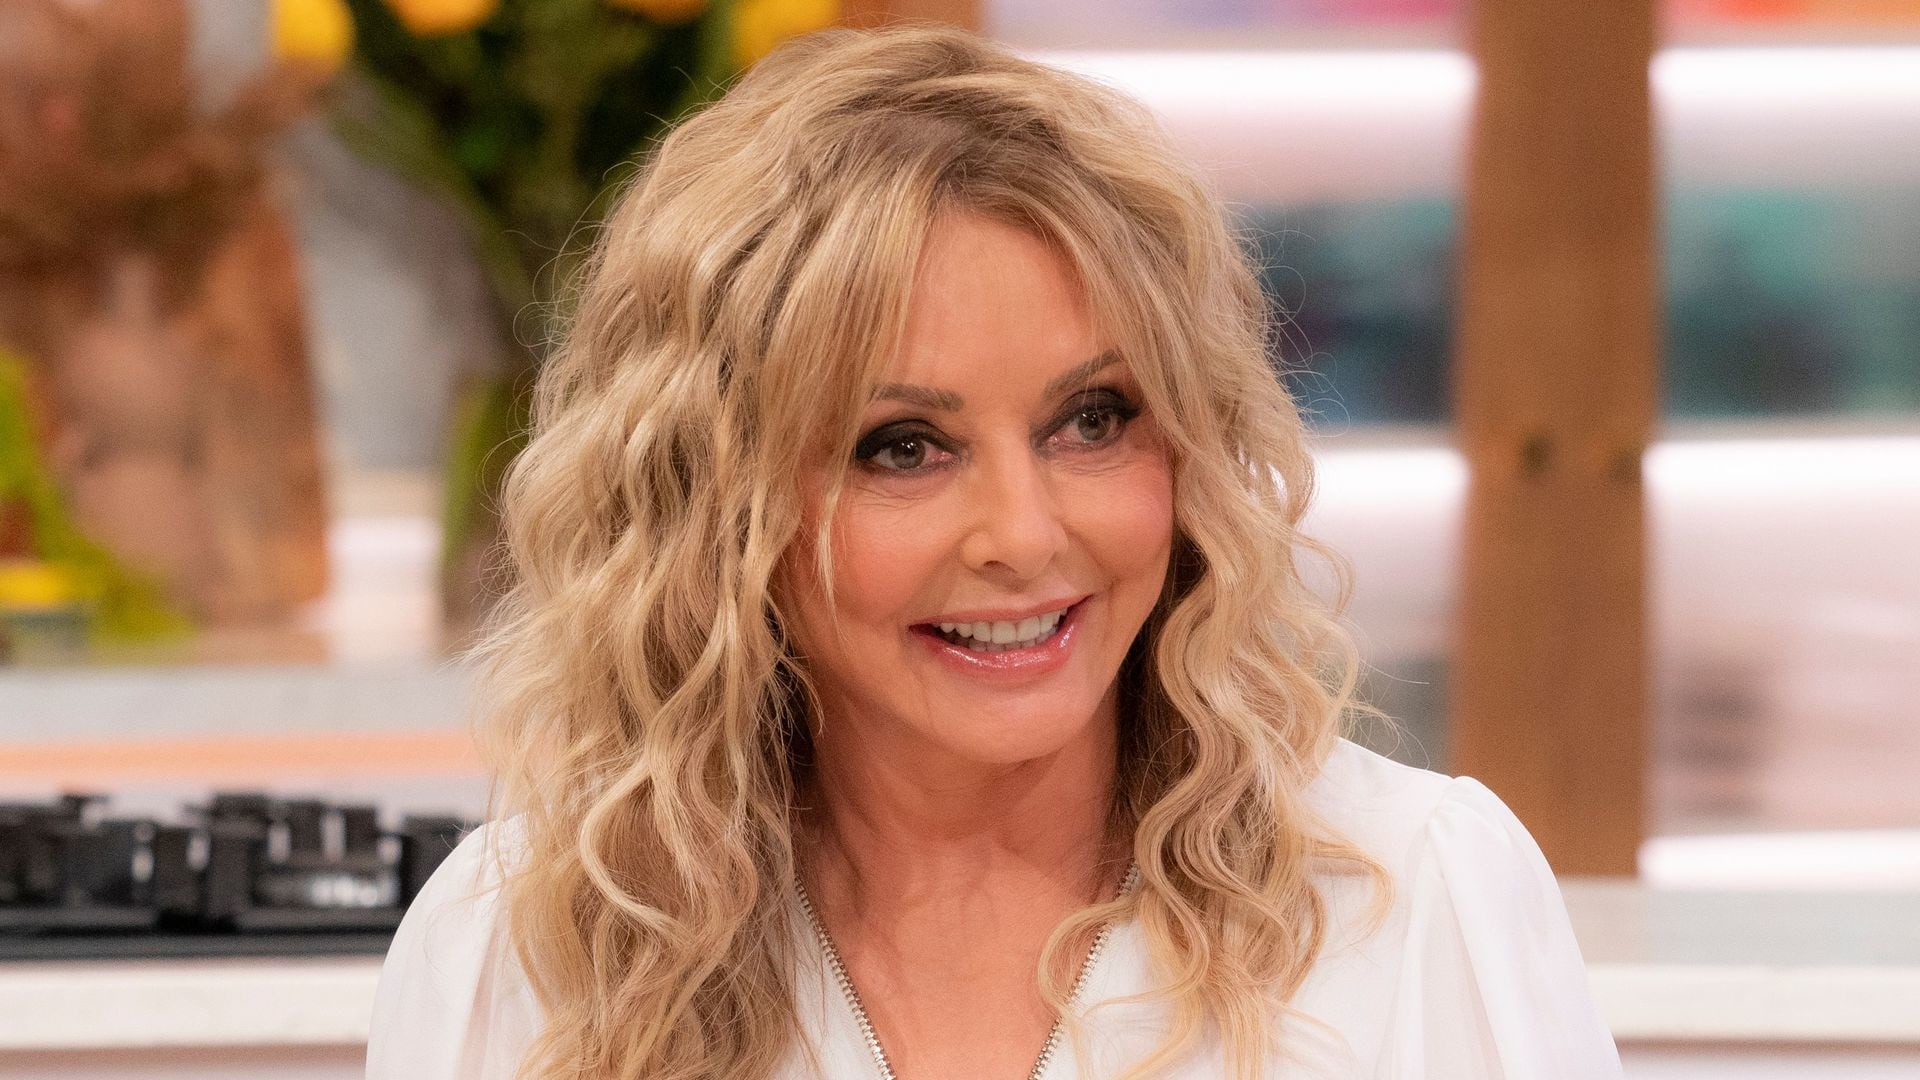 Carol Vorderman in white outfit